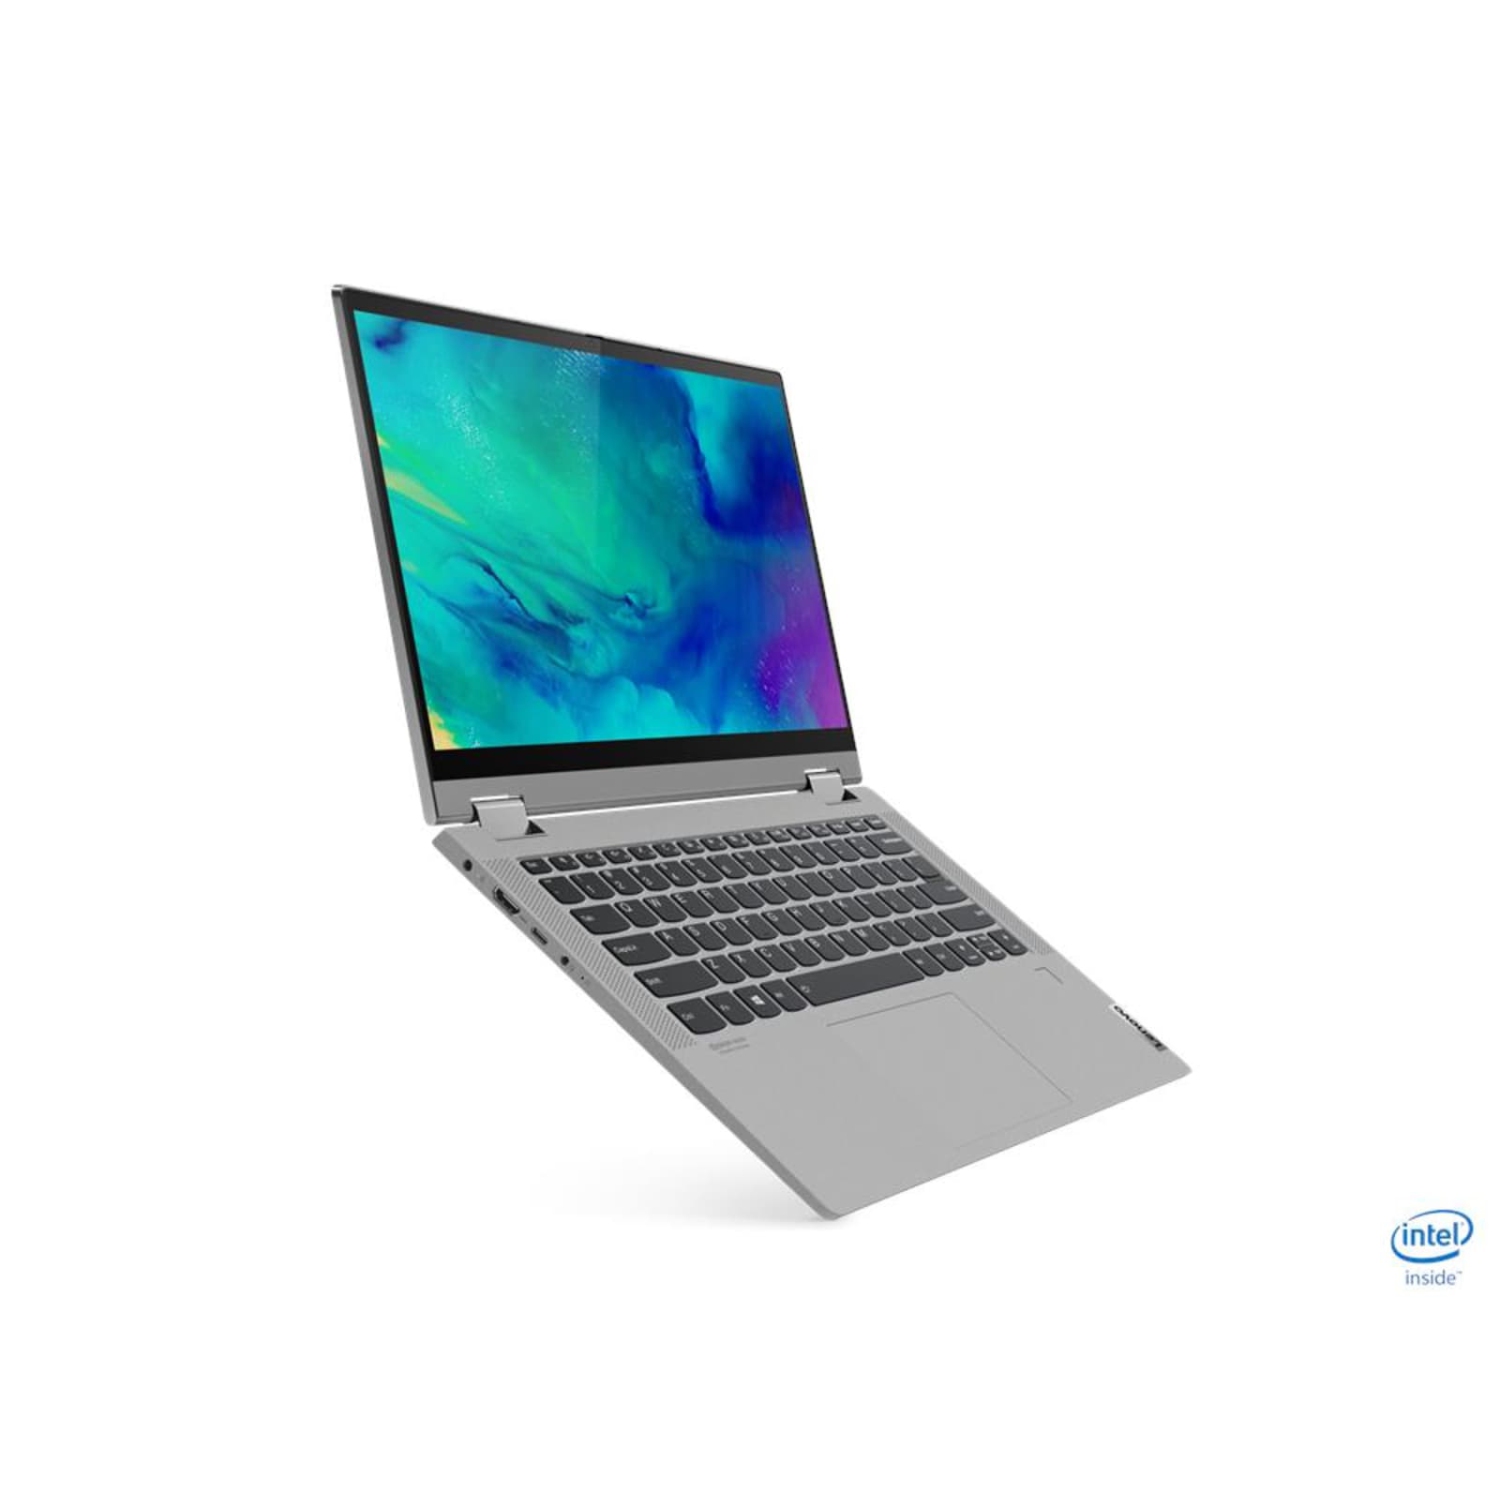 Refurbished (Excellent) Lenovo IdeaPad Flex 5 14ITL05 2-in-1 Laptop | 14" 1920x1080 FHD | Core i3-1115G4 - 256GB SSD Hard Drive - 4GB RAM | 2 cores @ 4.1 GHz Win 10 Home Silver